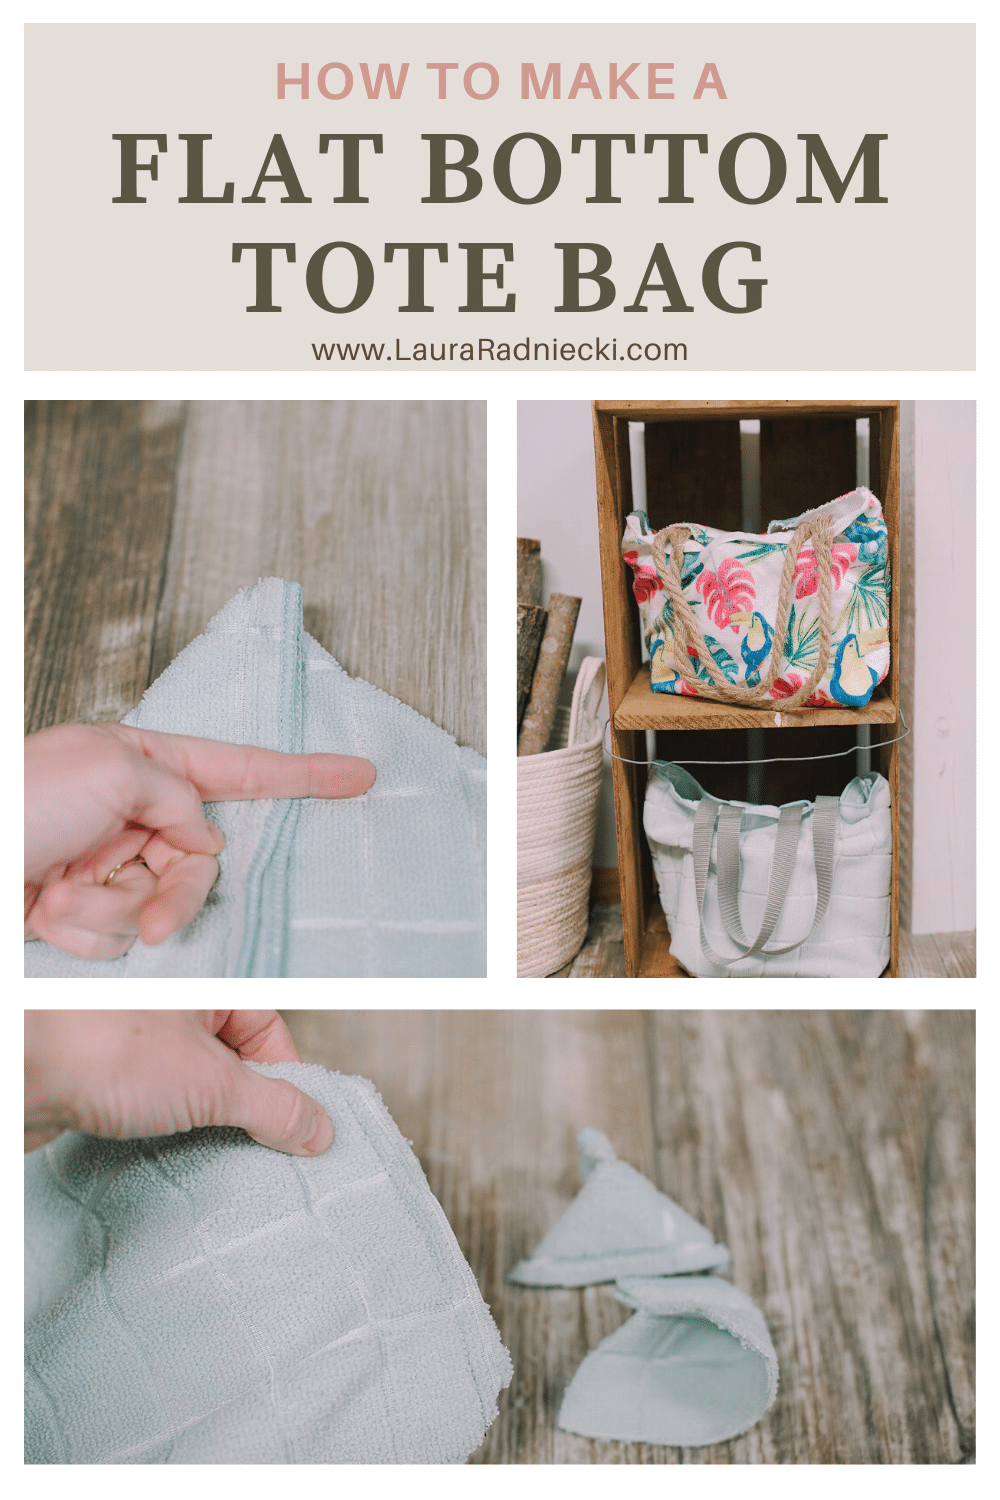 How to Make a Flat Bottom Tote Bag out of Hand Towels | DIY Flat-Bottomed Tote Bag from Handtowels